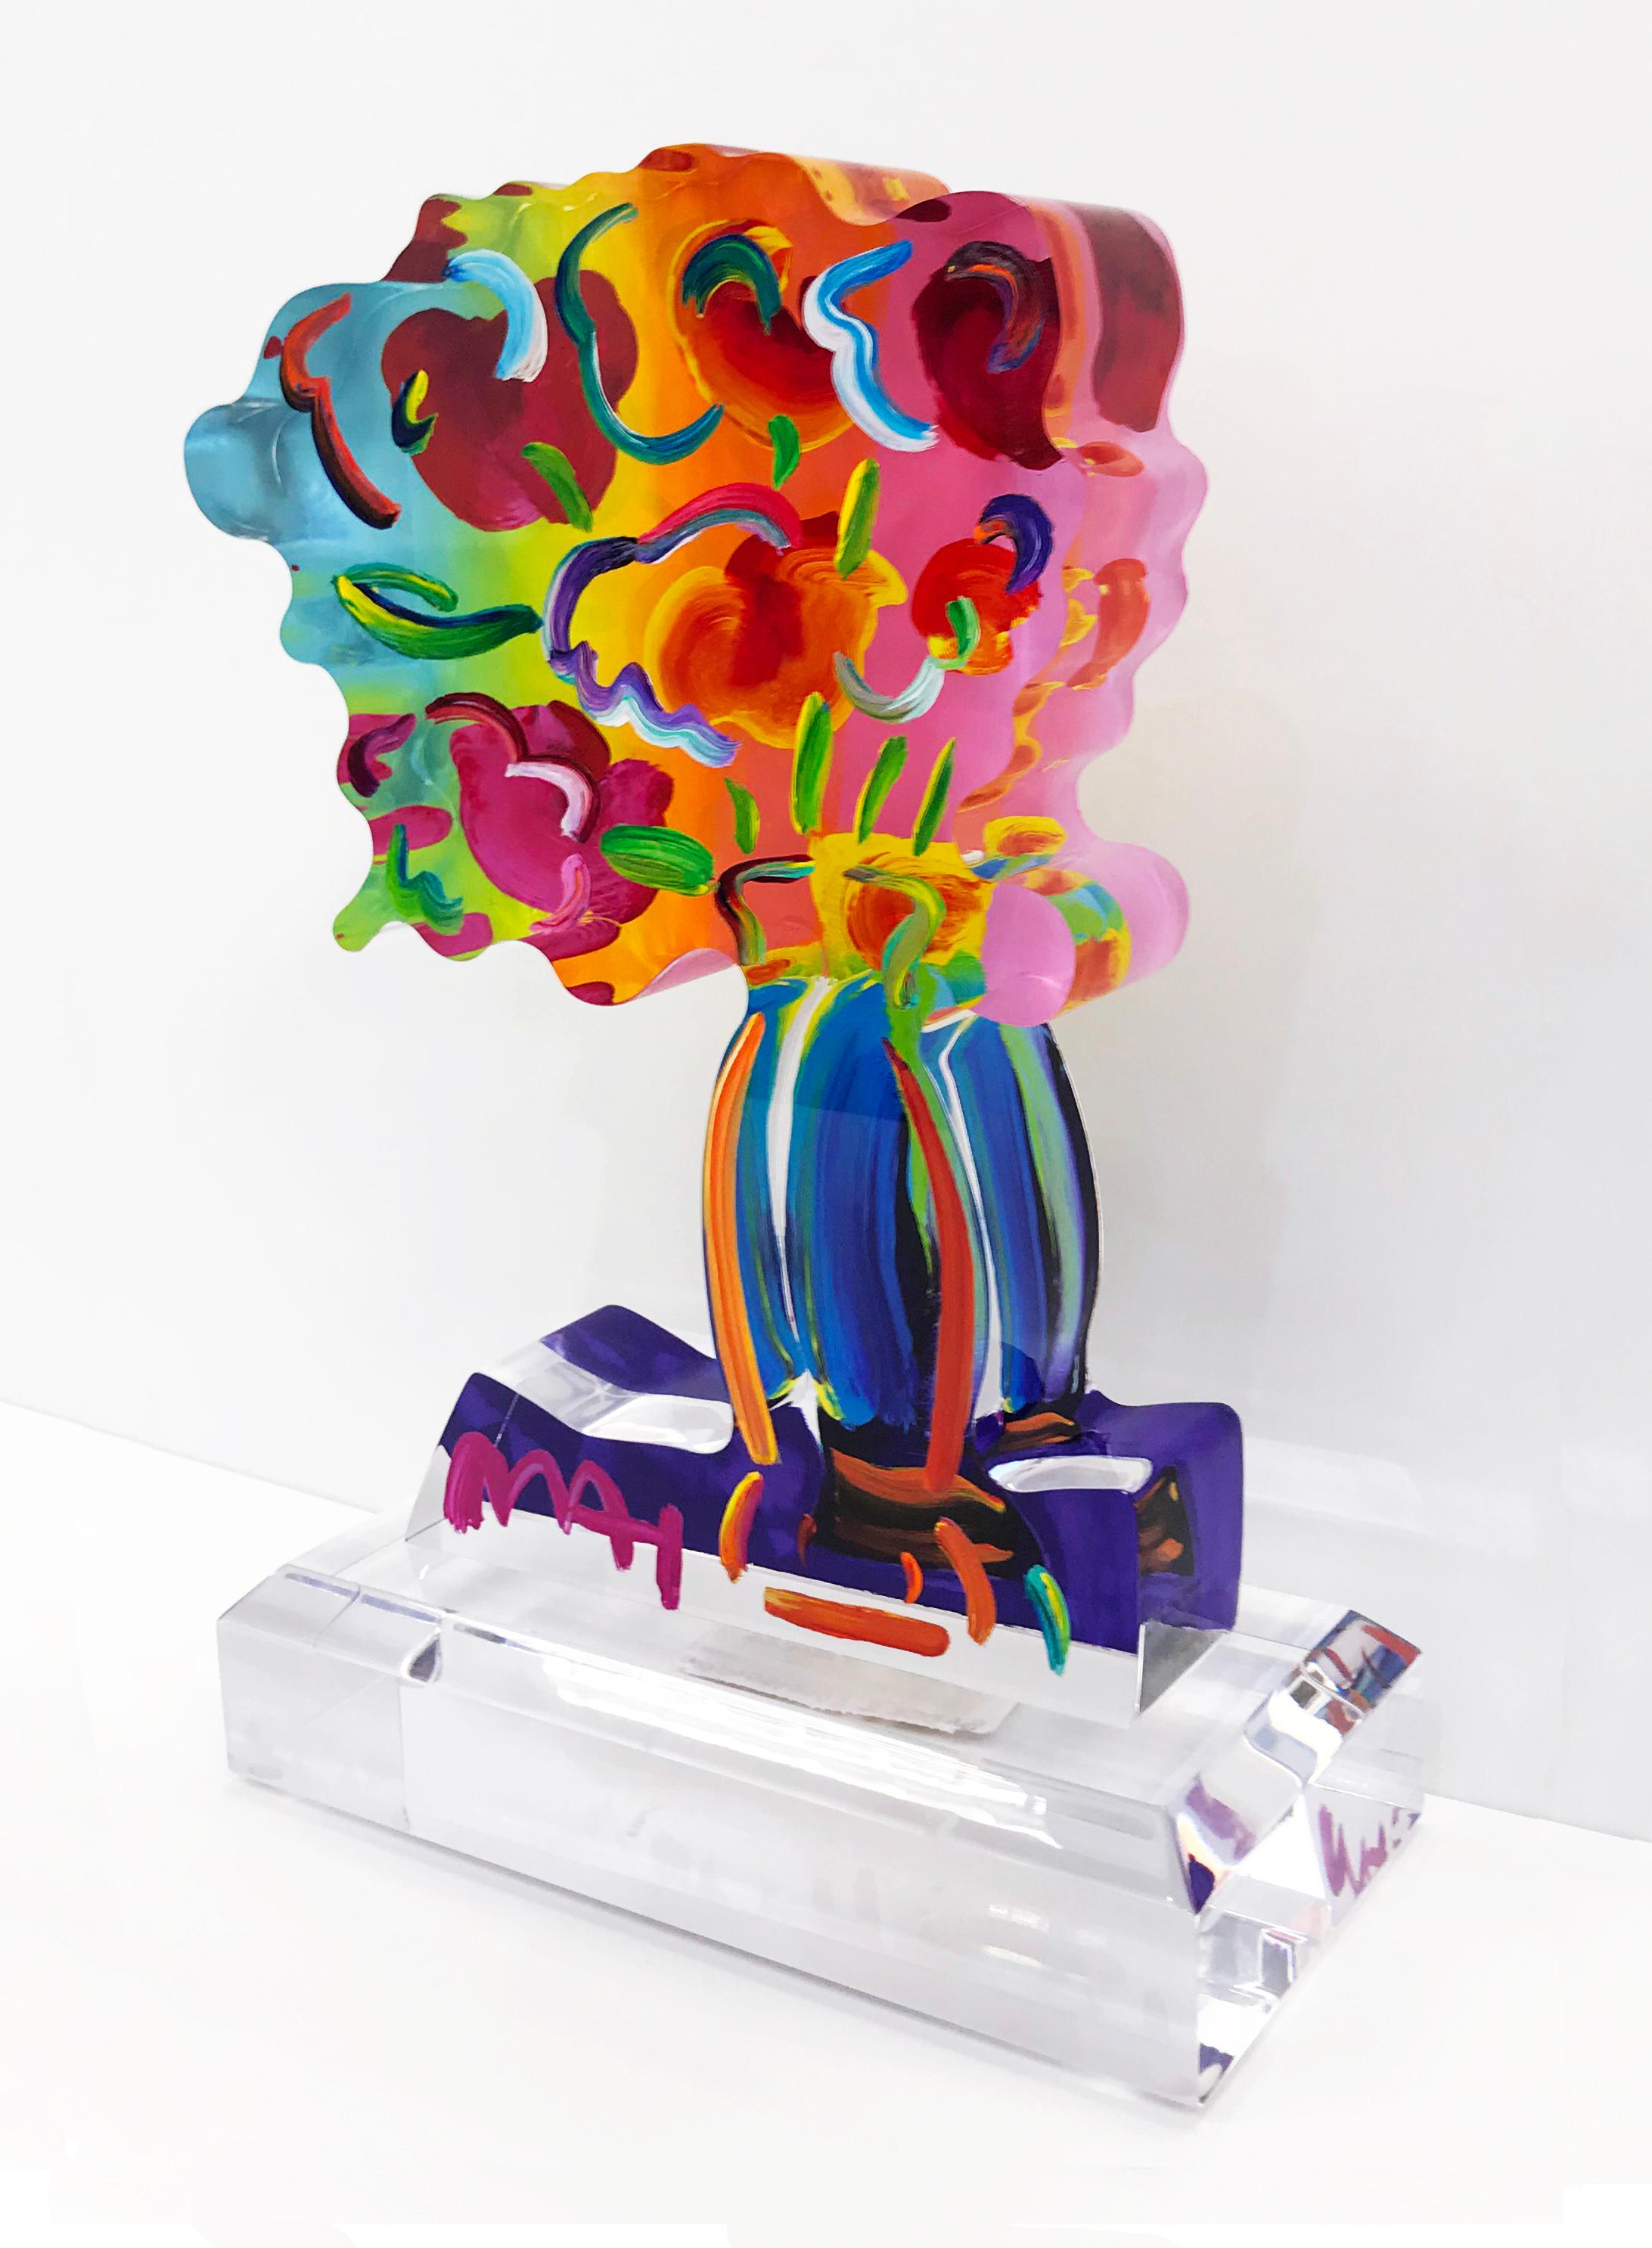 VASE OF FLOWERS (SCULPTURE) - Sculpture by Peter Max